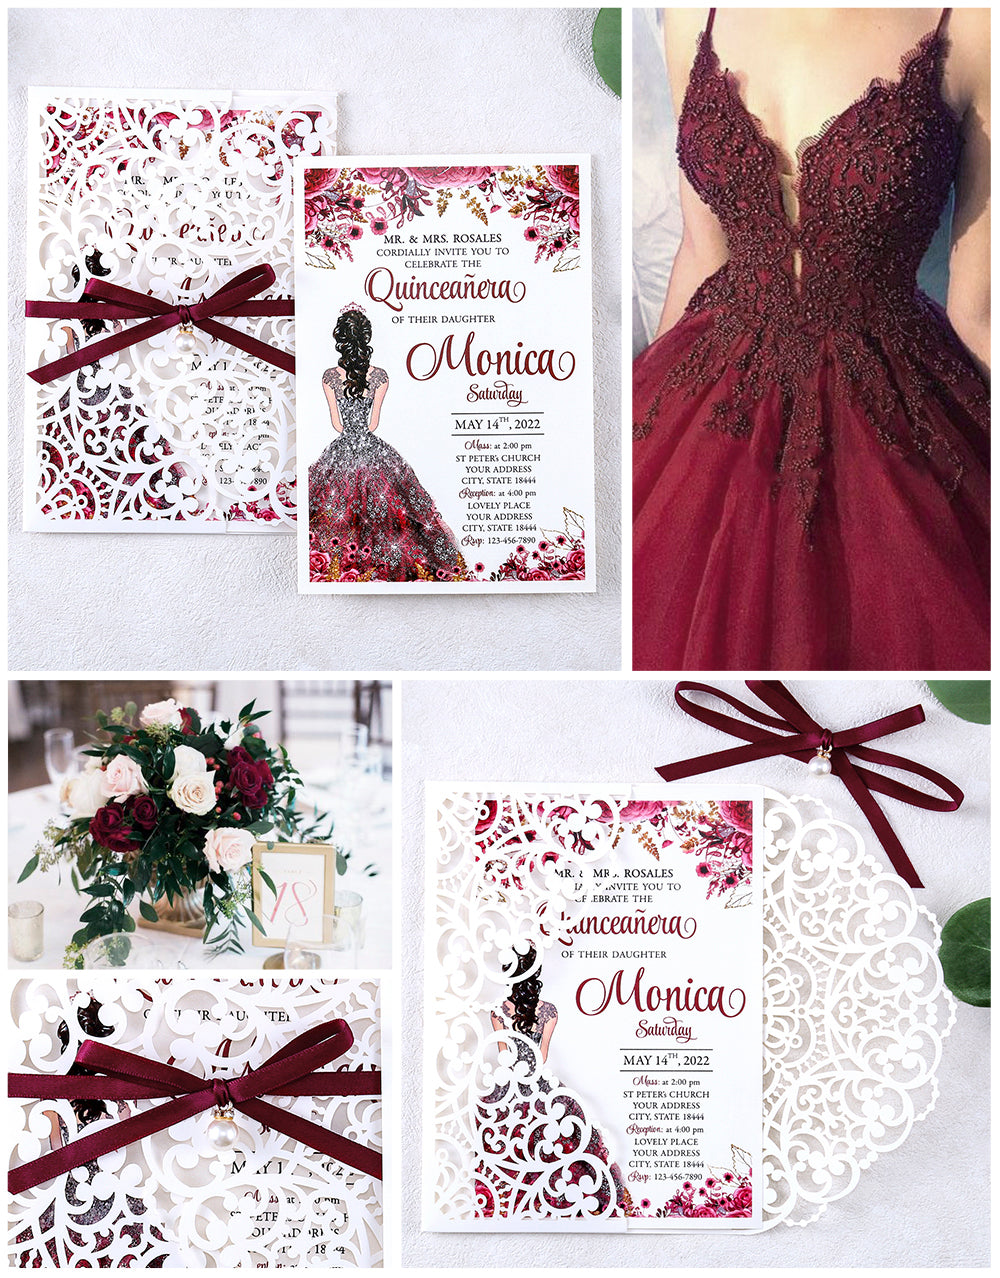 5 X 7.2" Laser Cut Hollow Rose Quinceanera invitations Cards With Burgundy Ribbon And Envelopes For Quinceanera Sweet 15 Invite